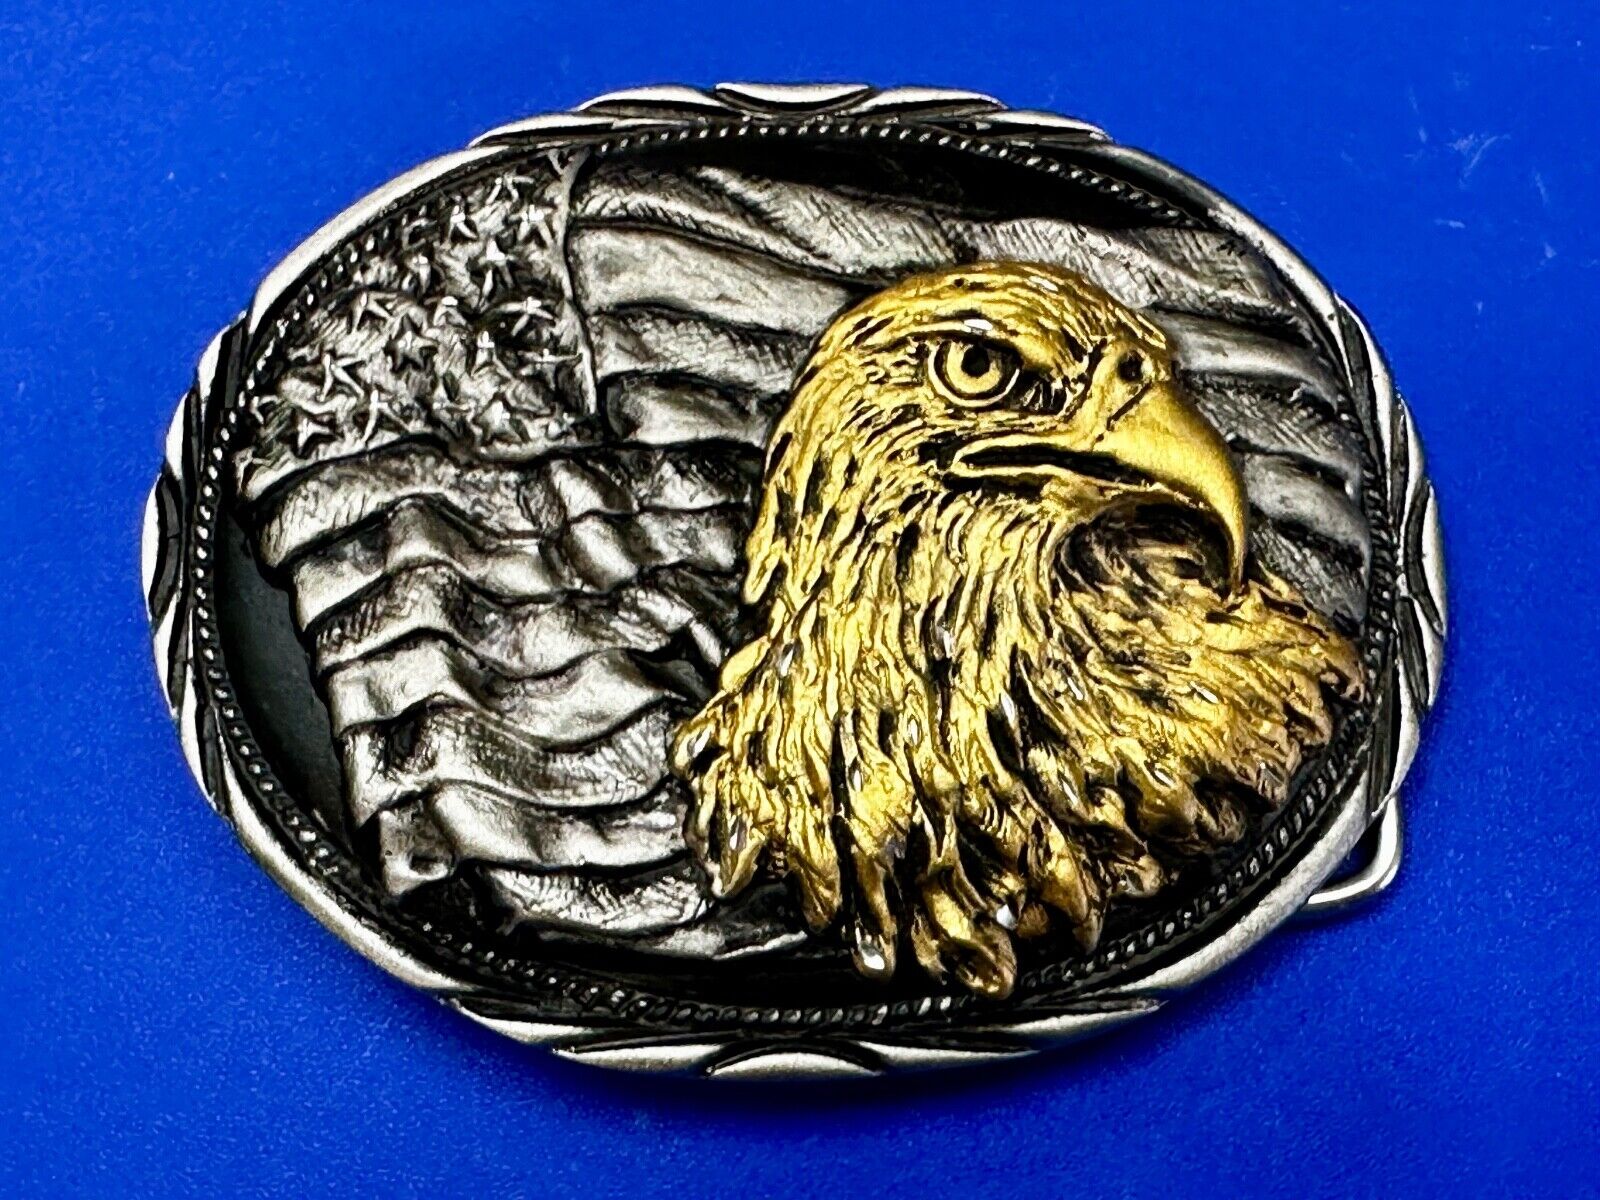 American Bald Eagle - Patriotic Flag Oval Handcrafted by SSI Belt Buckle